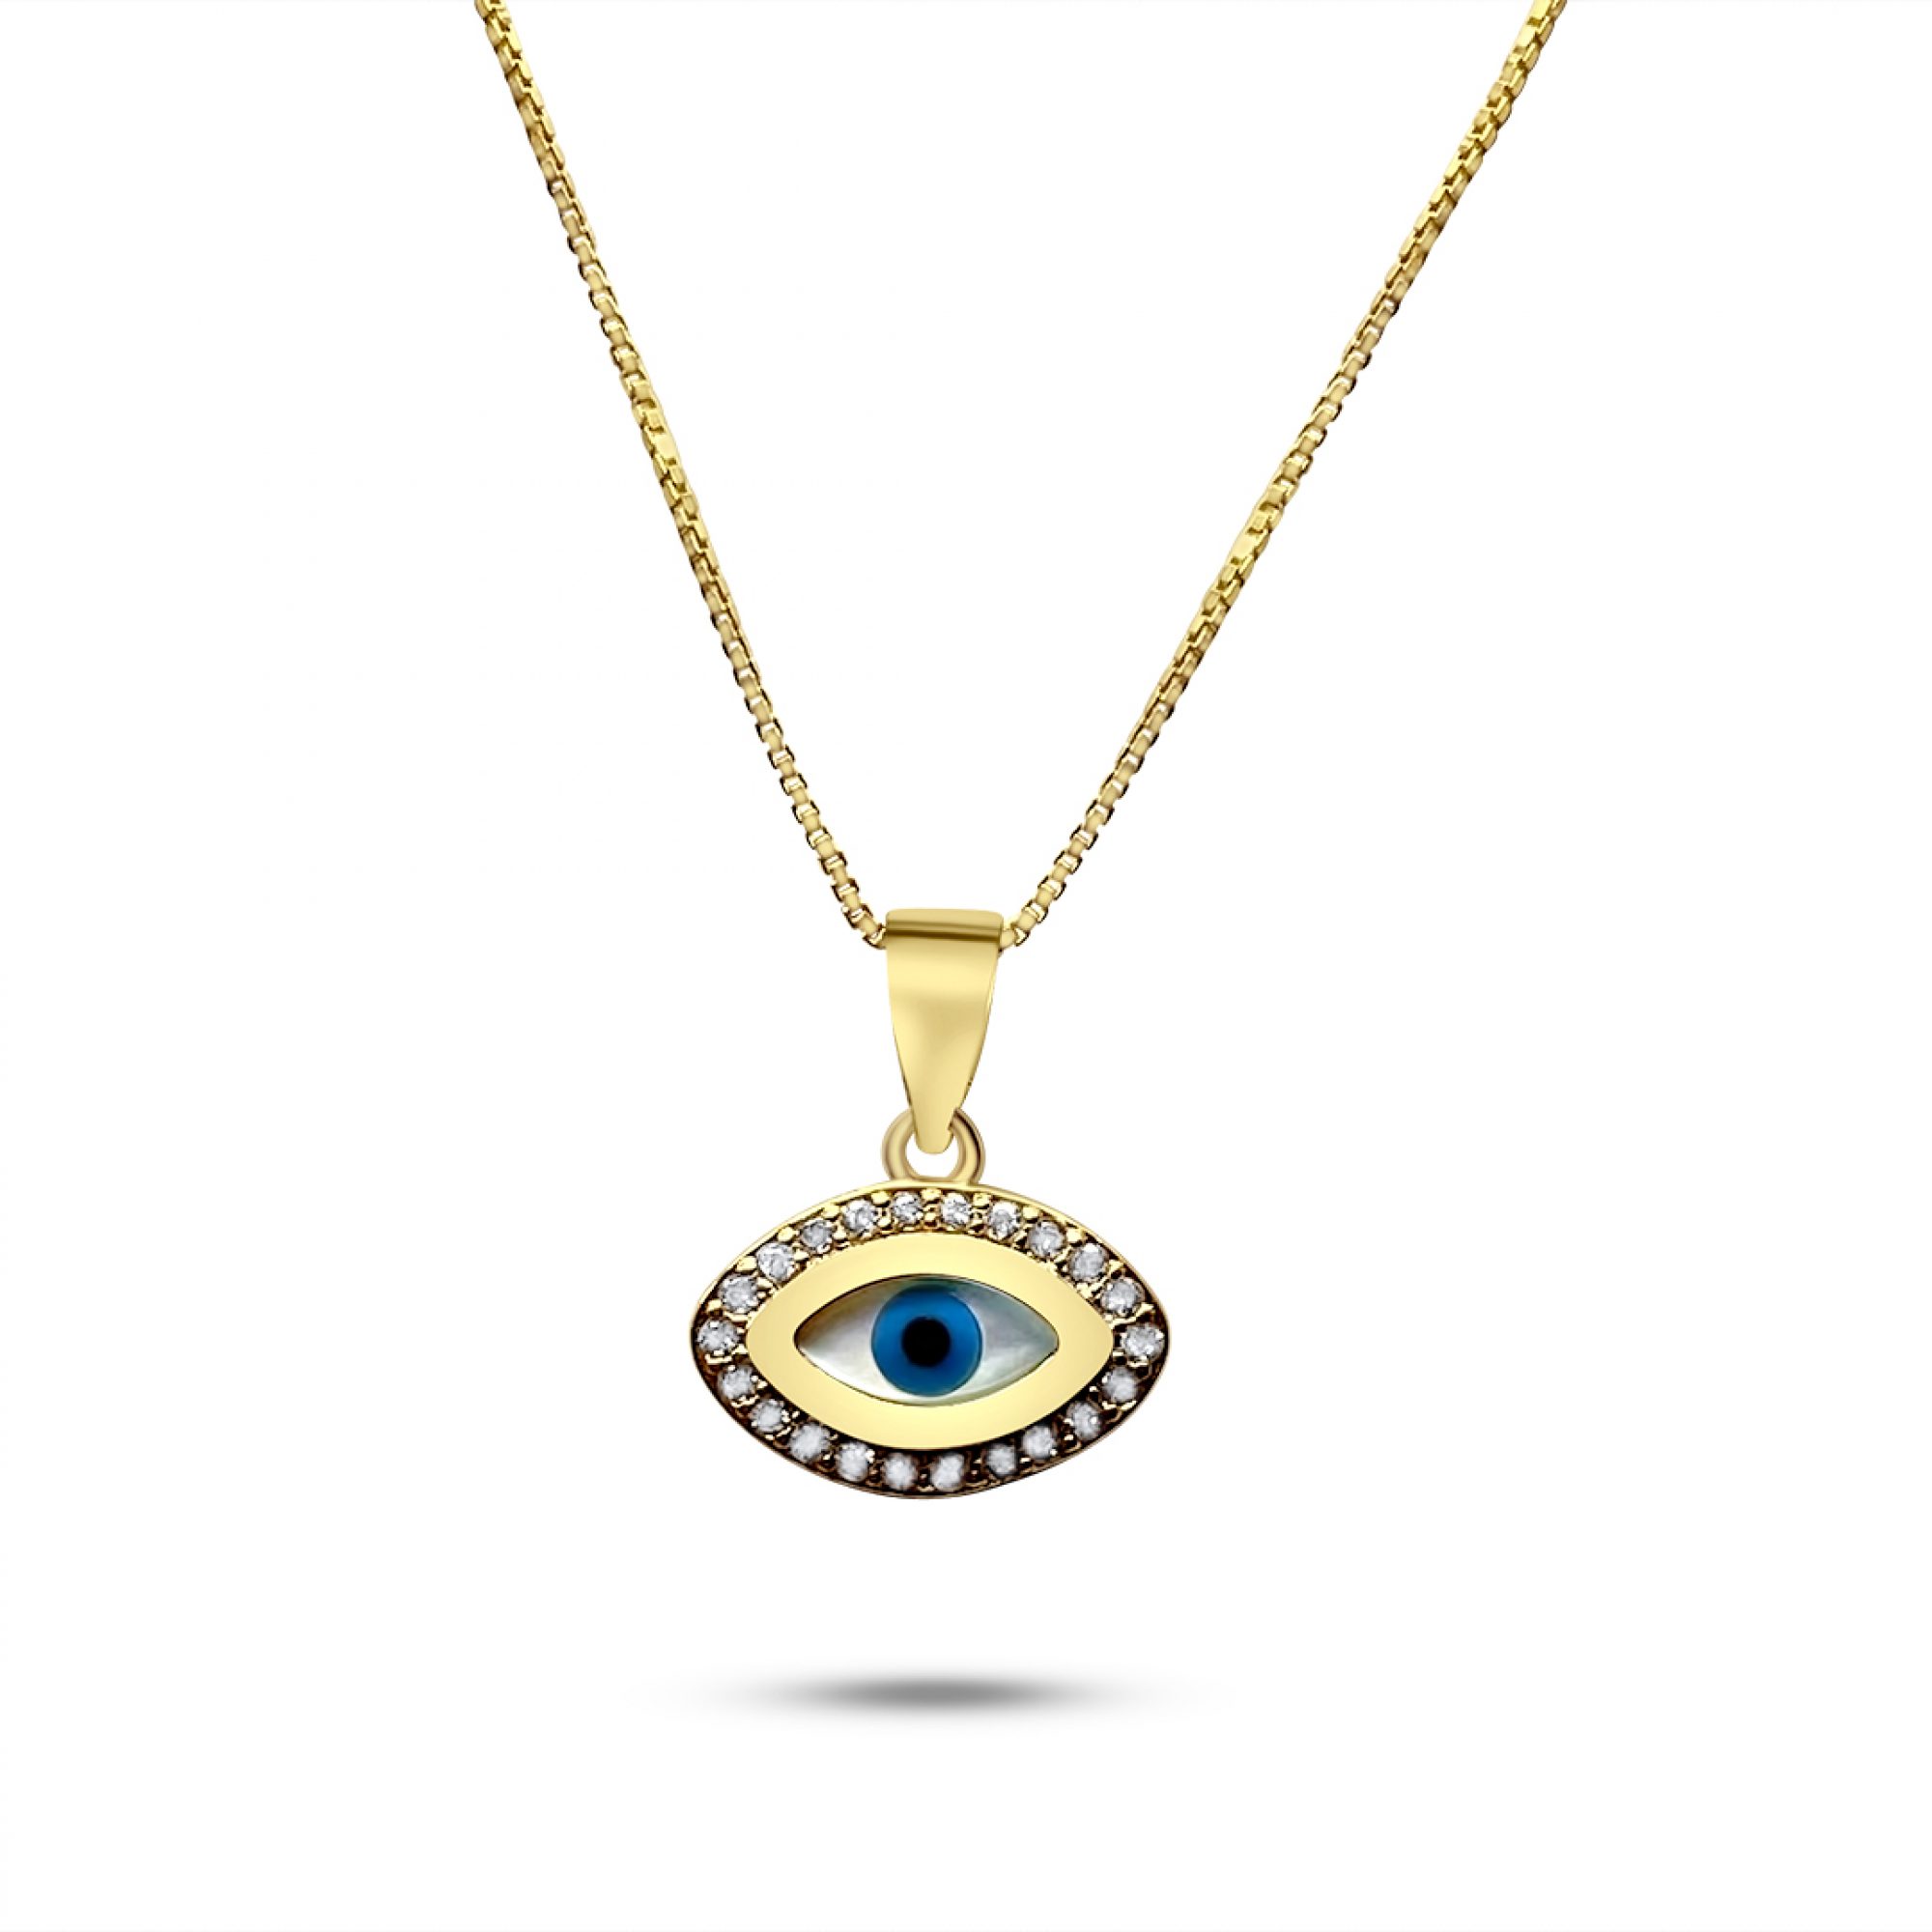 Gold plated eye pendant necklace with mother of pearl and zircon stones